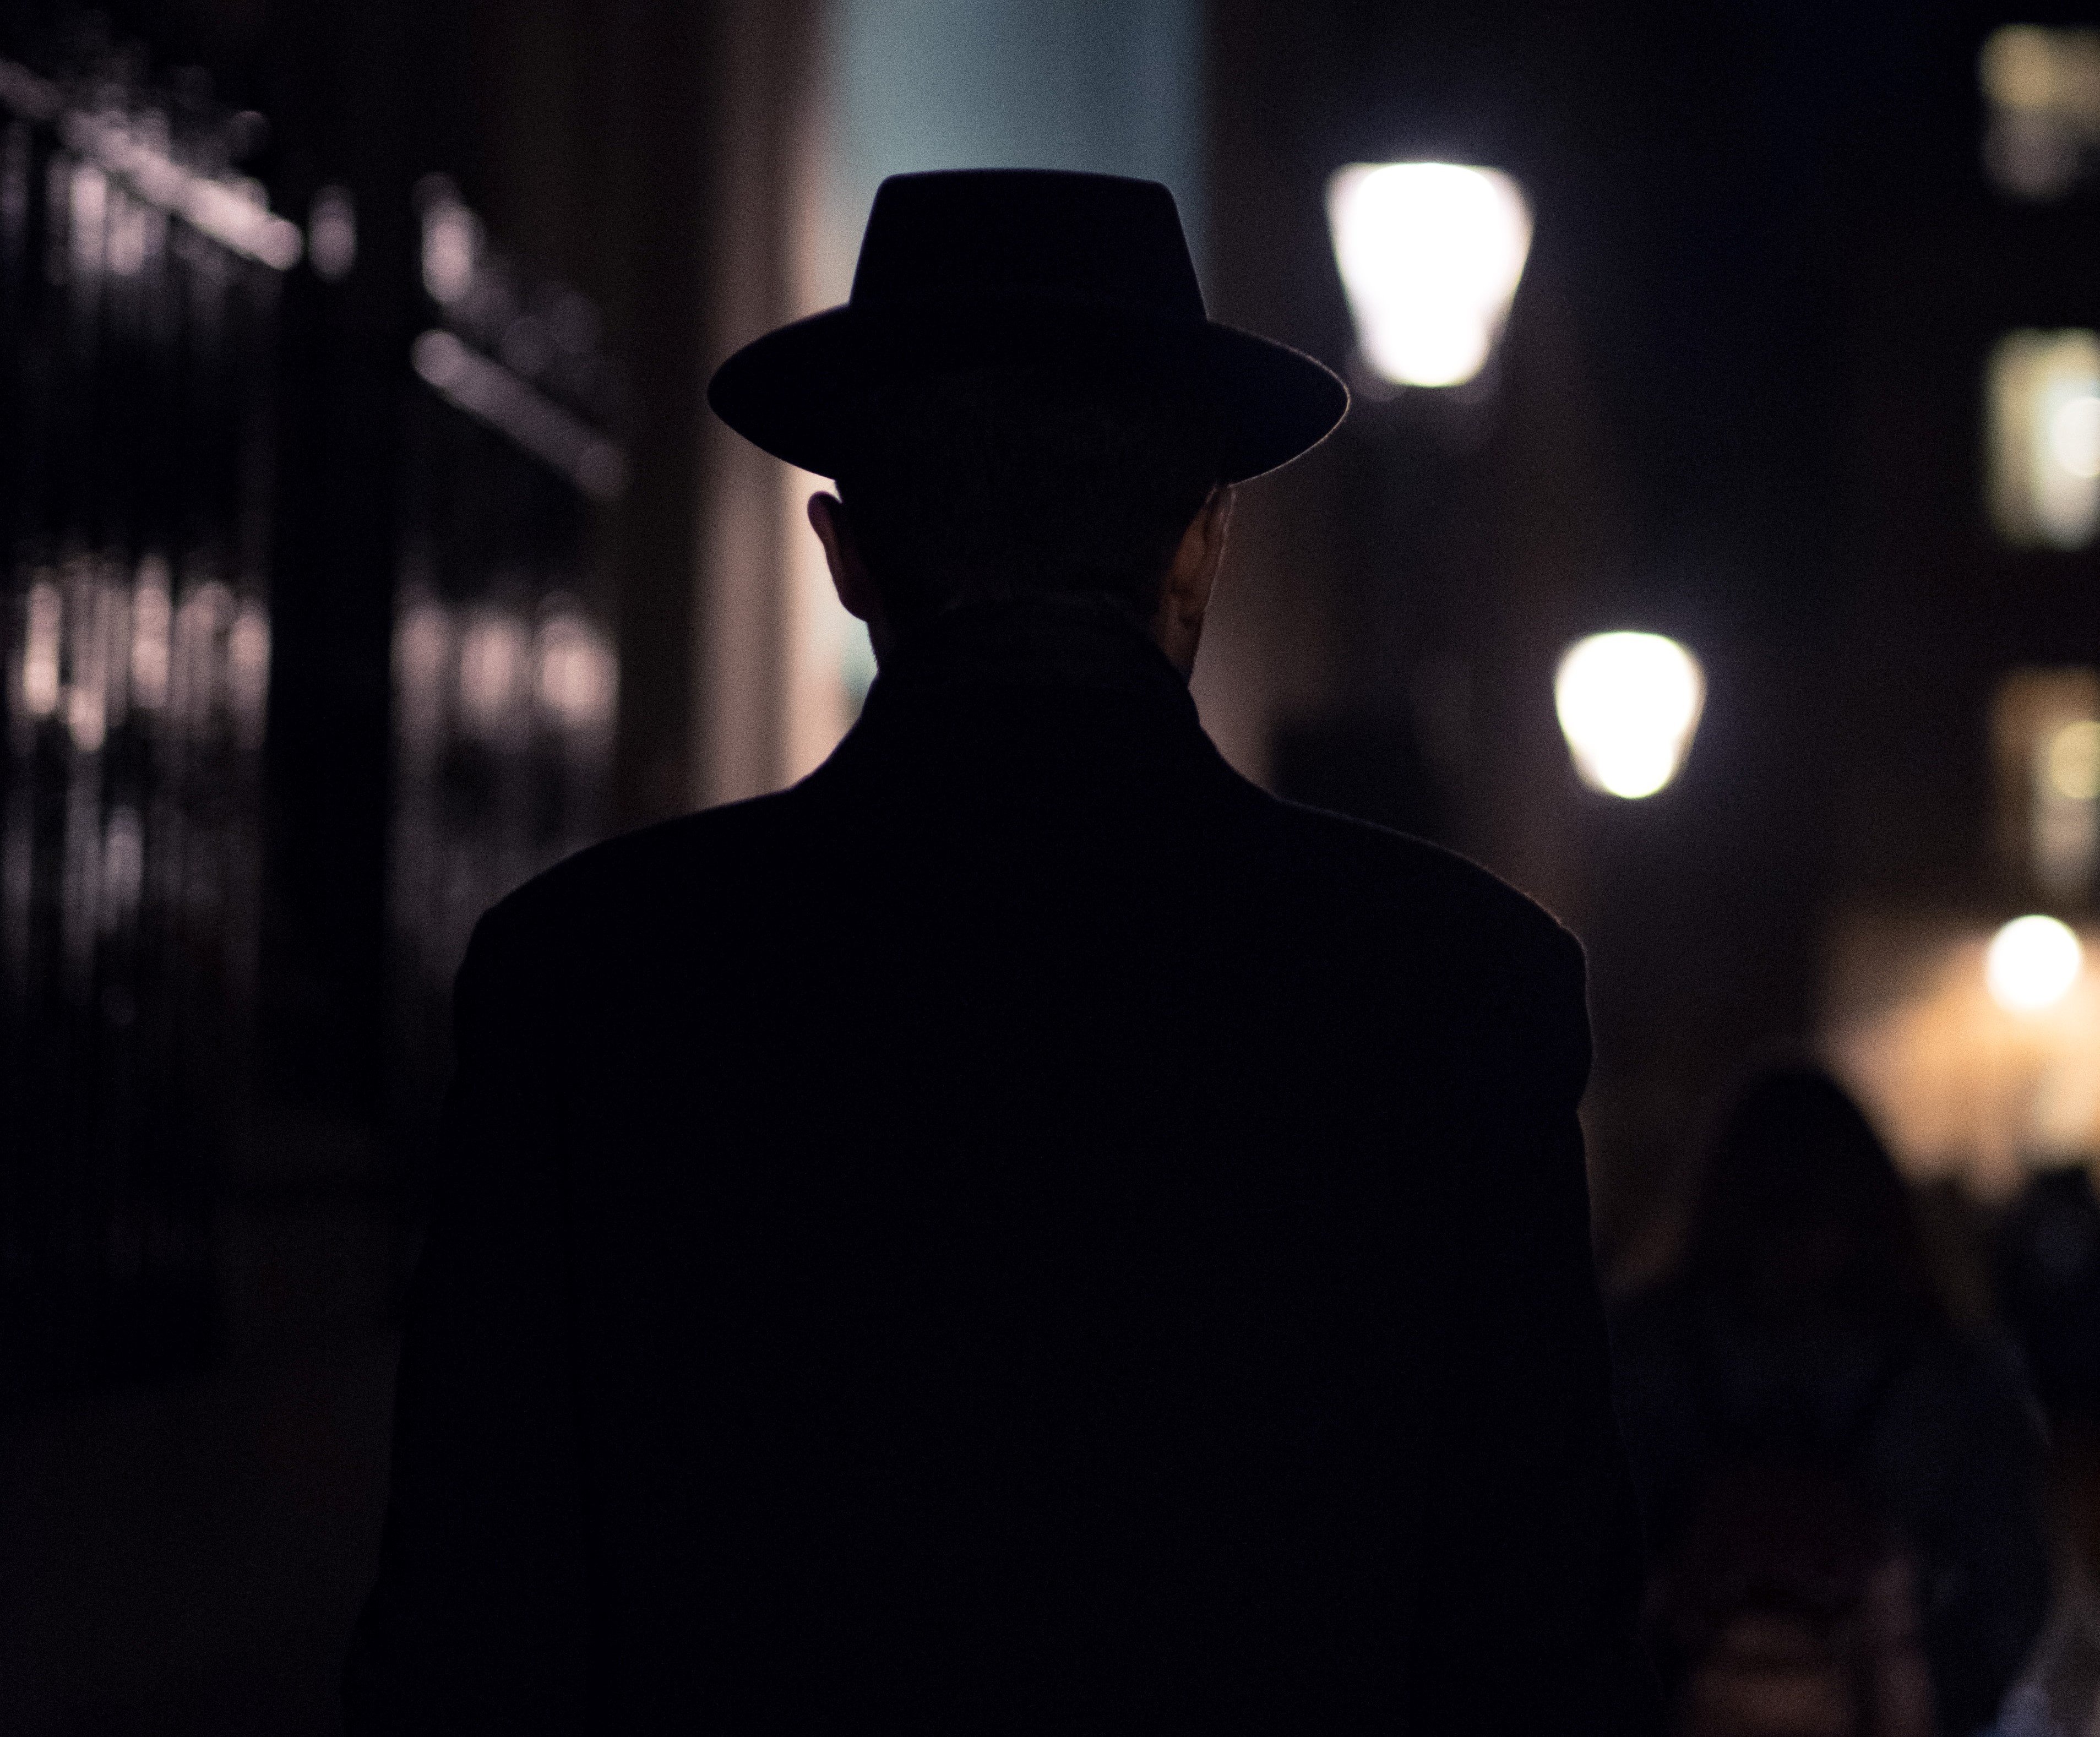 Unable to surmise his wife's infidelity, OP hired a detective to spy on her. | Source: Unsplash